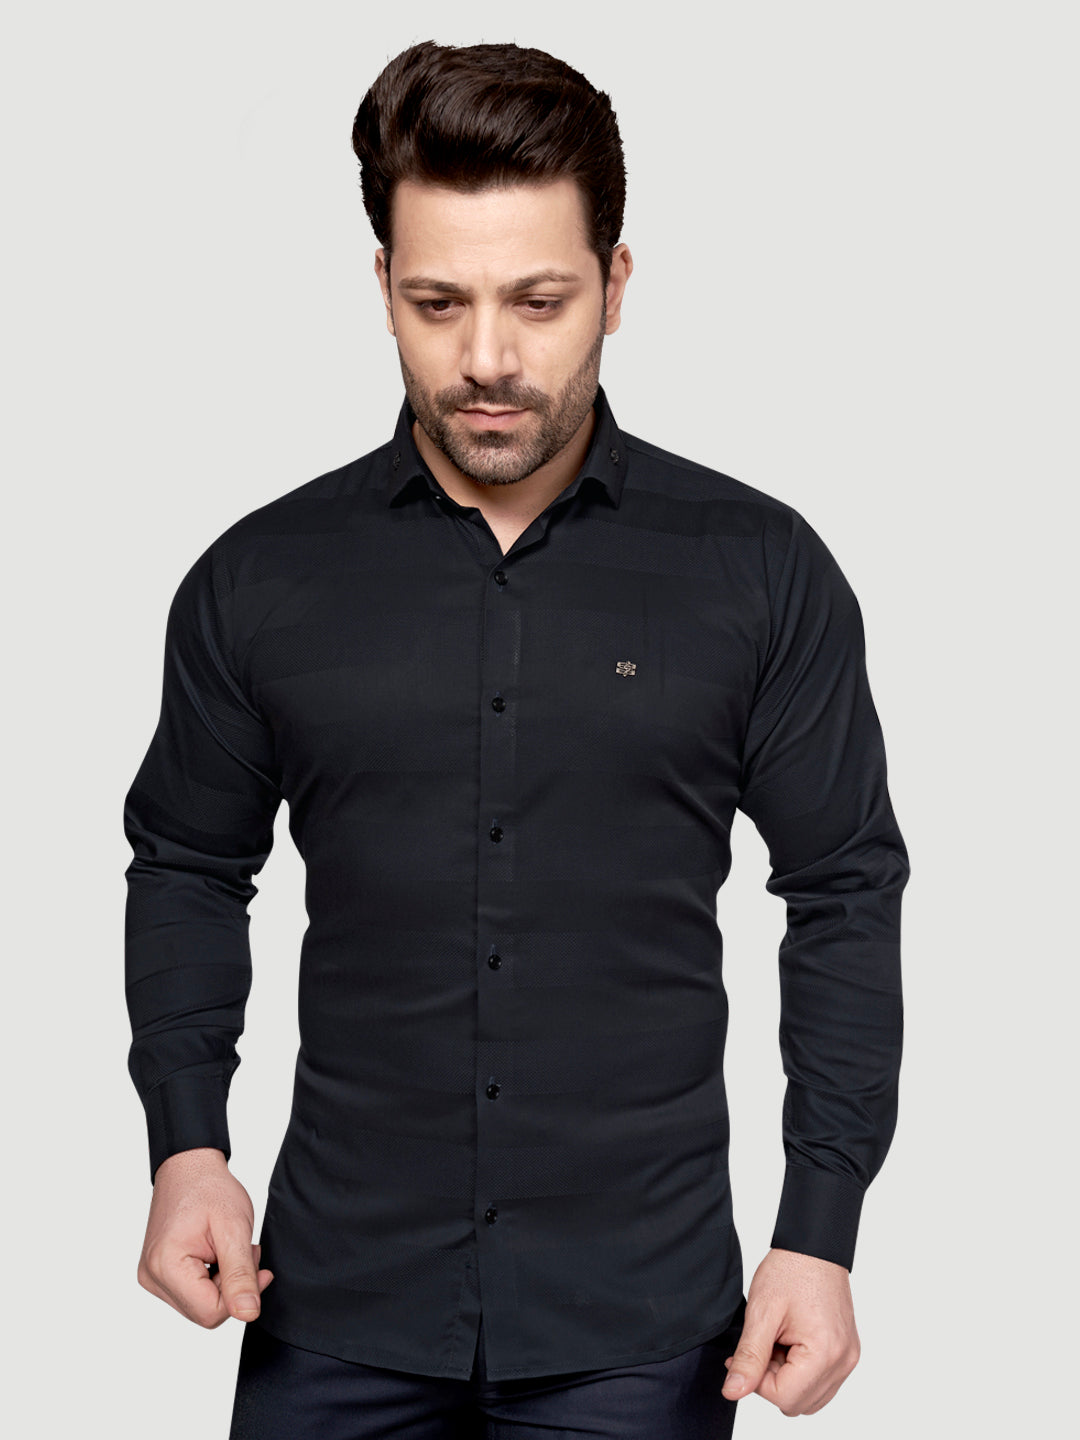 Black and White Men's Designer Shirt with Collar Accessory & Broach Black